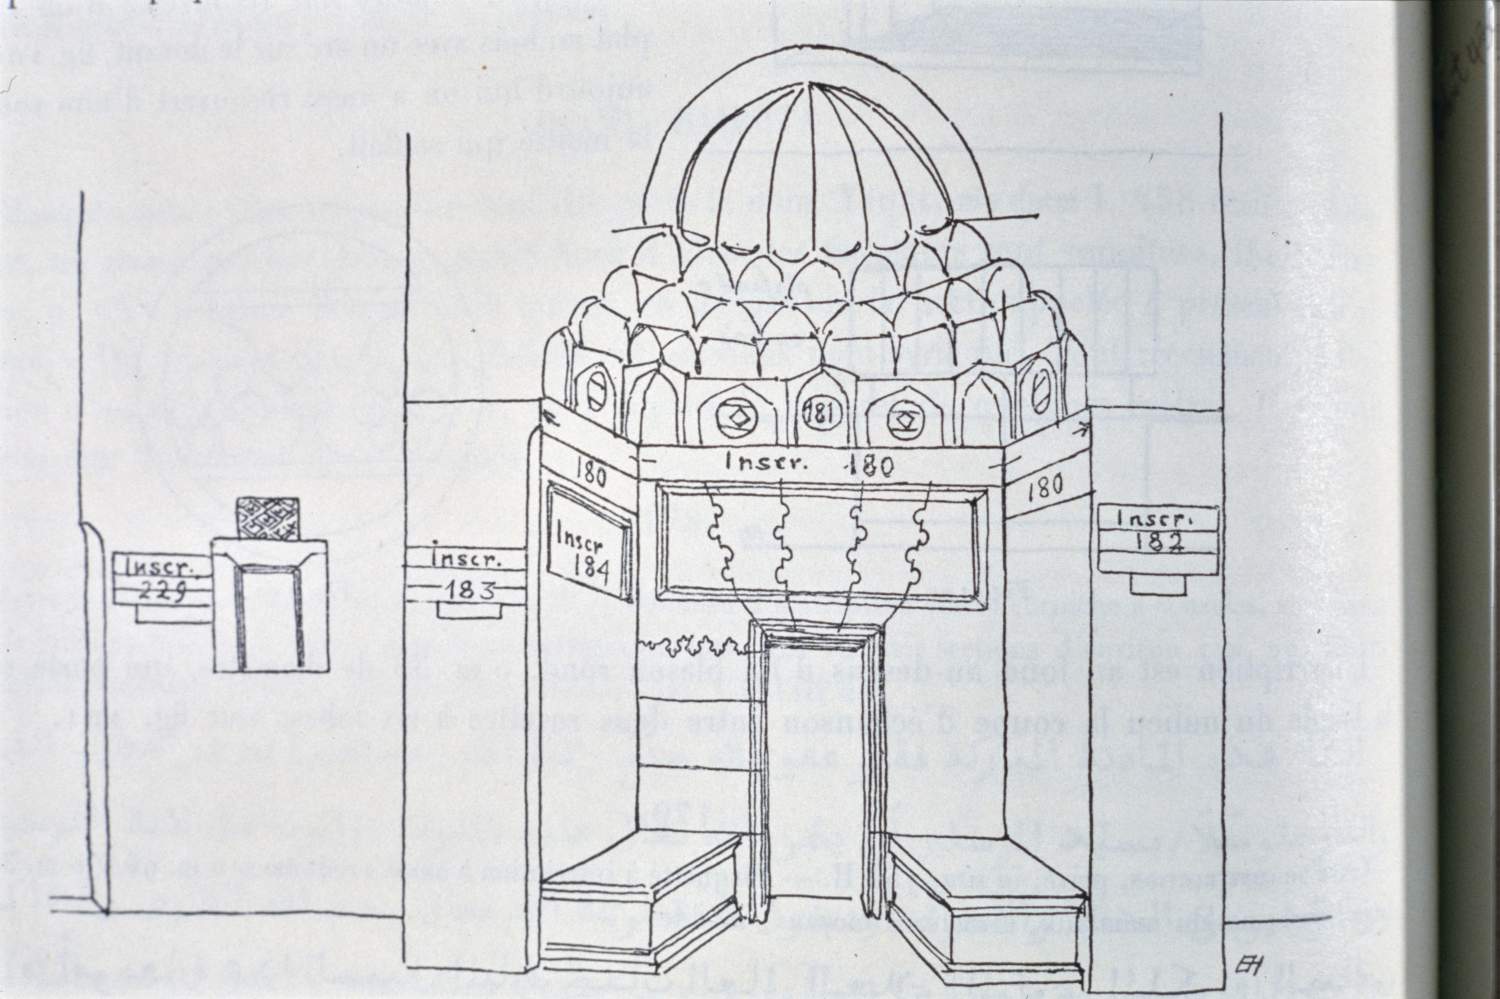 Entry portal detail with inscriptions labeled. Drawing by Ernst Herzfeld.